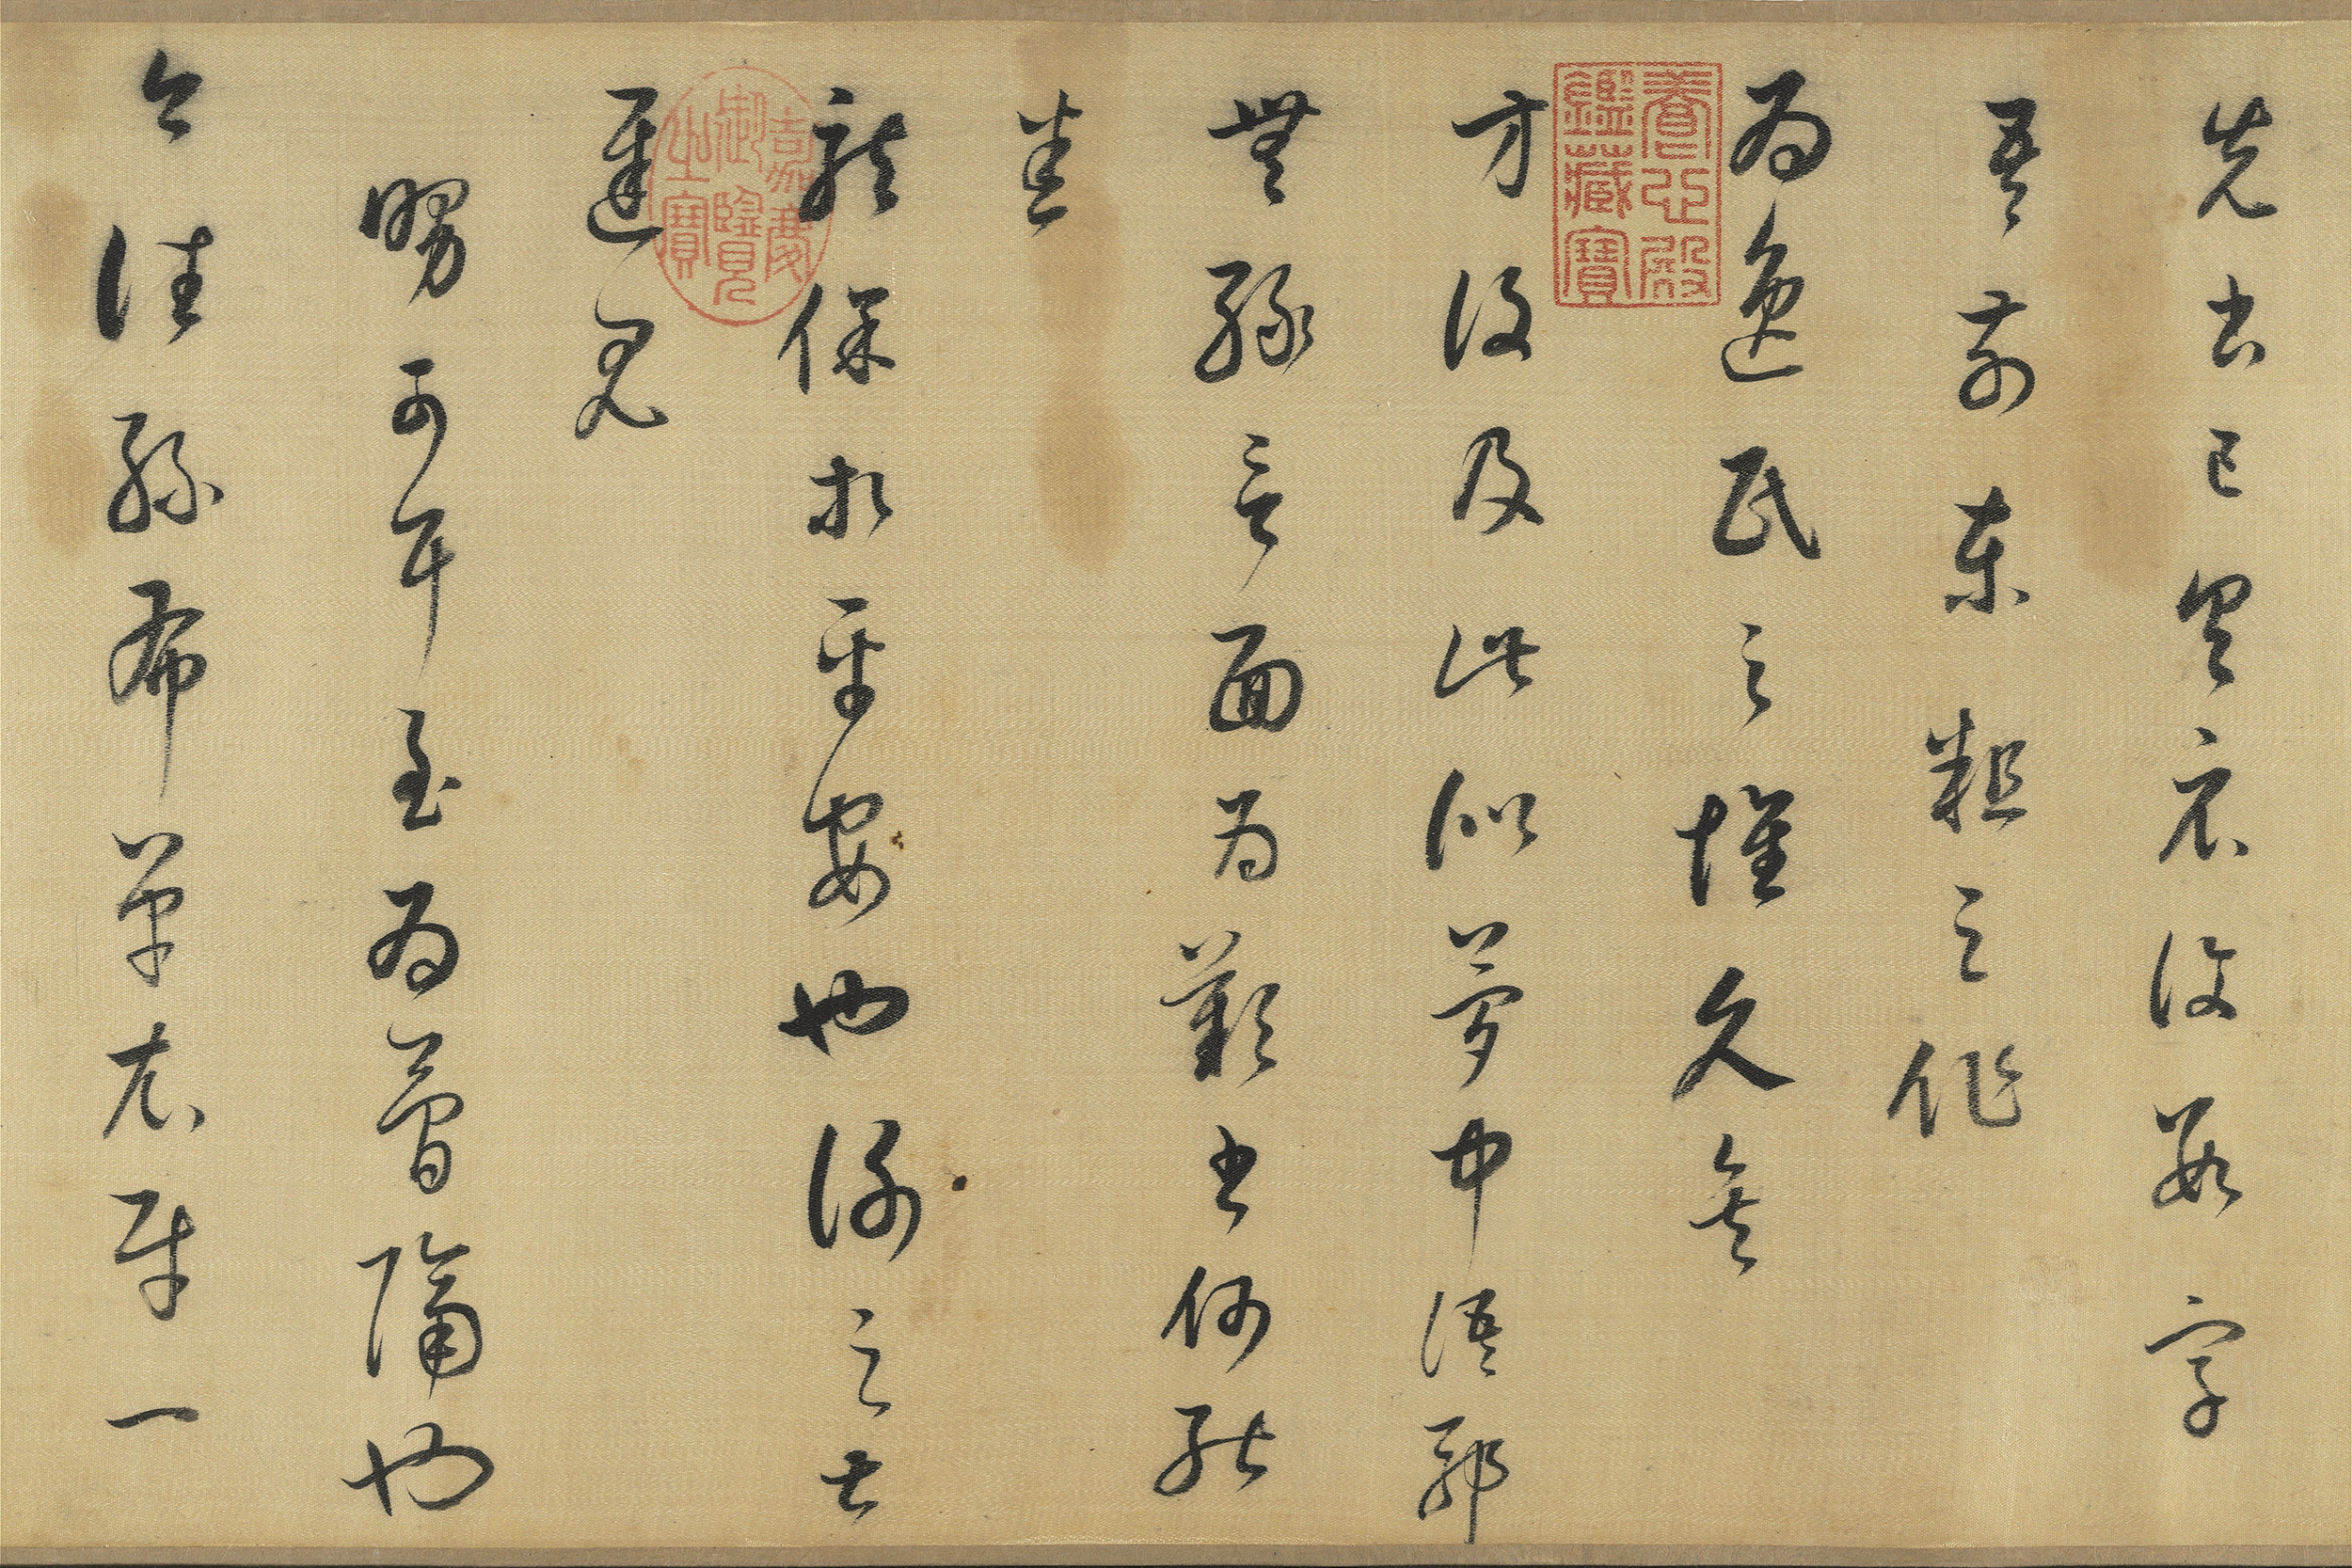 Copy of the “Seventeen Inscription” Dong Qichang, Ming dynasty-2